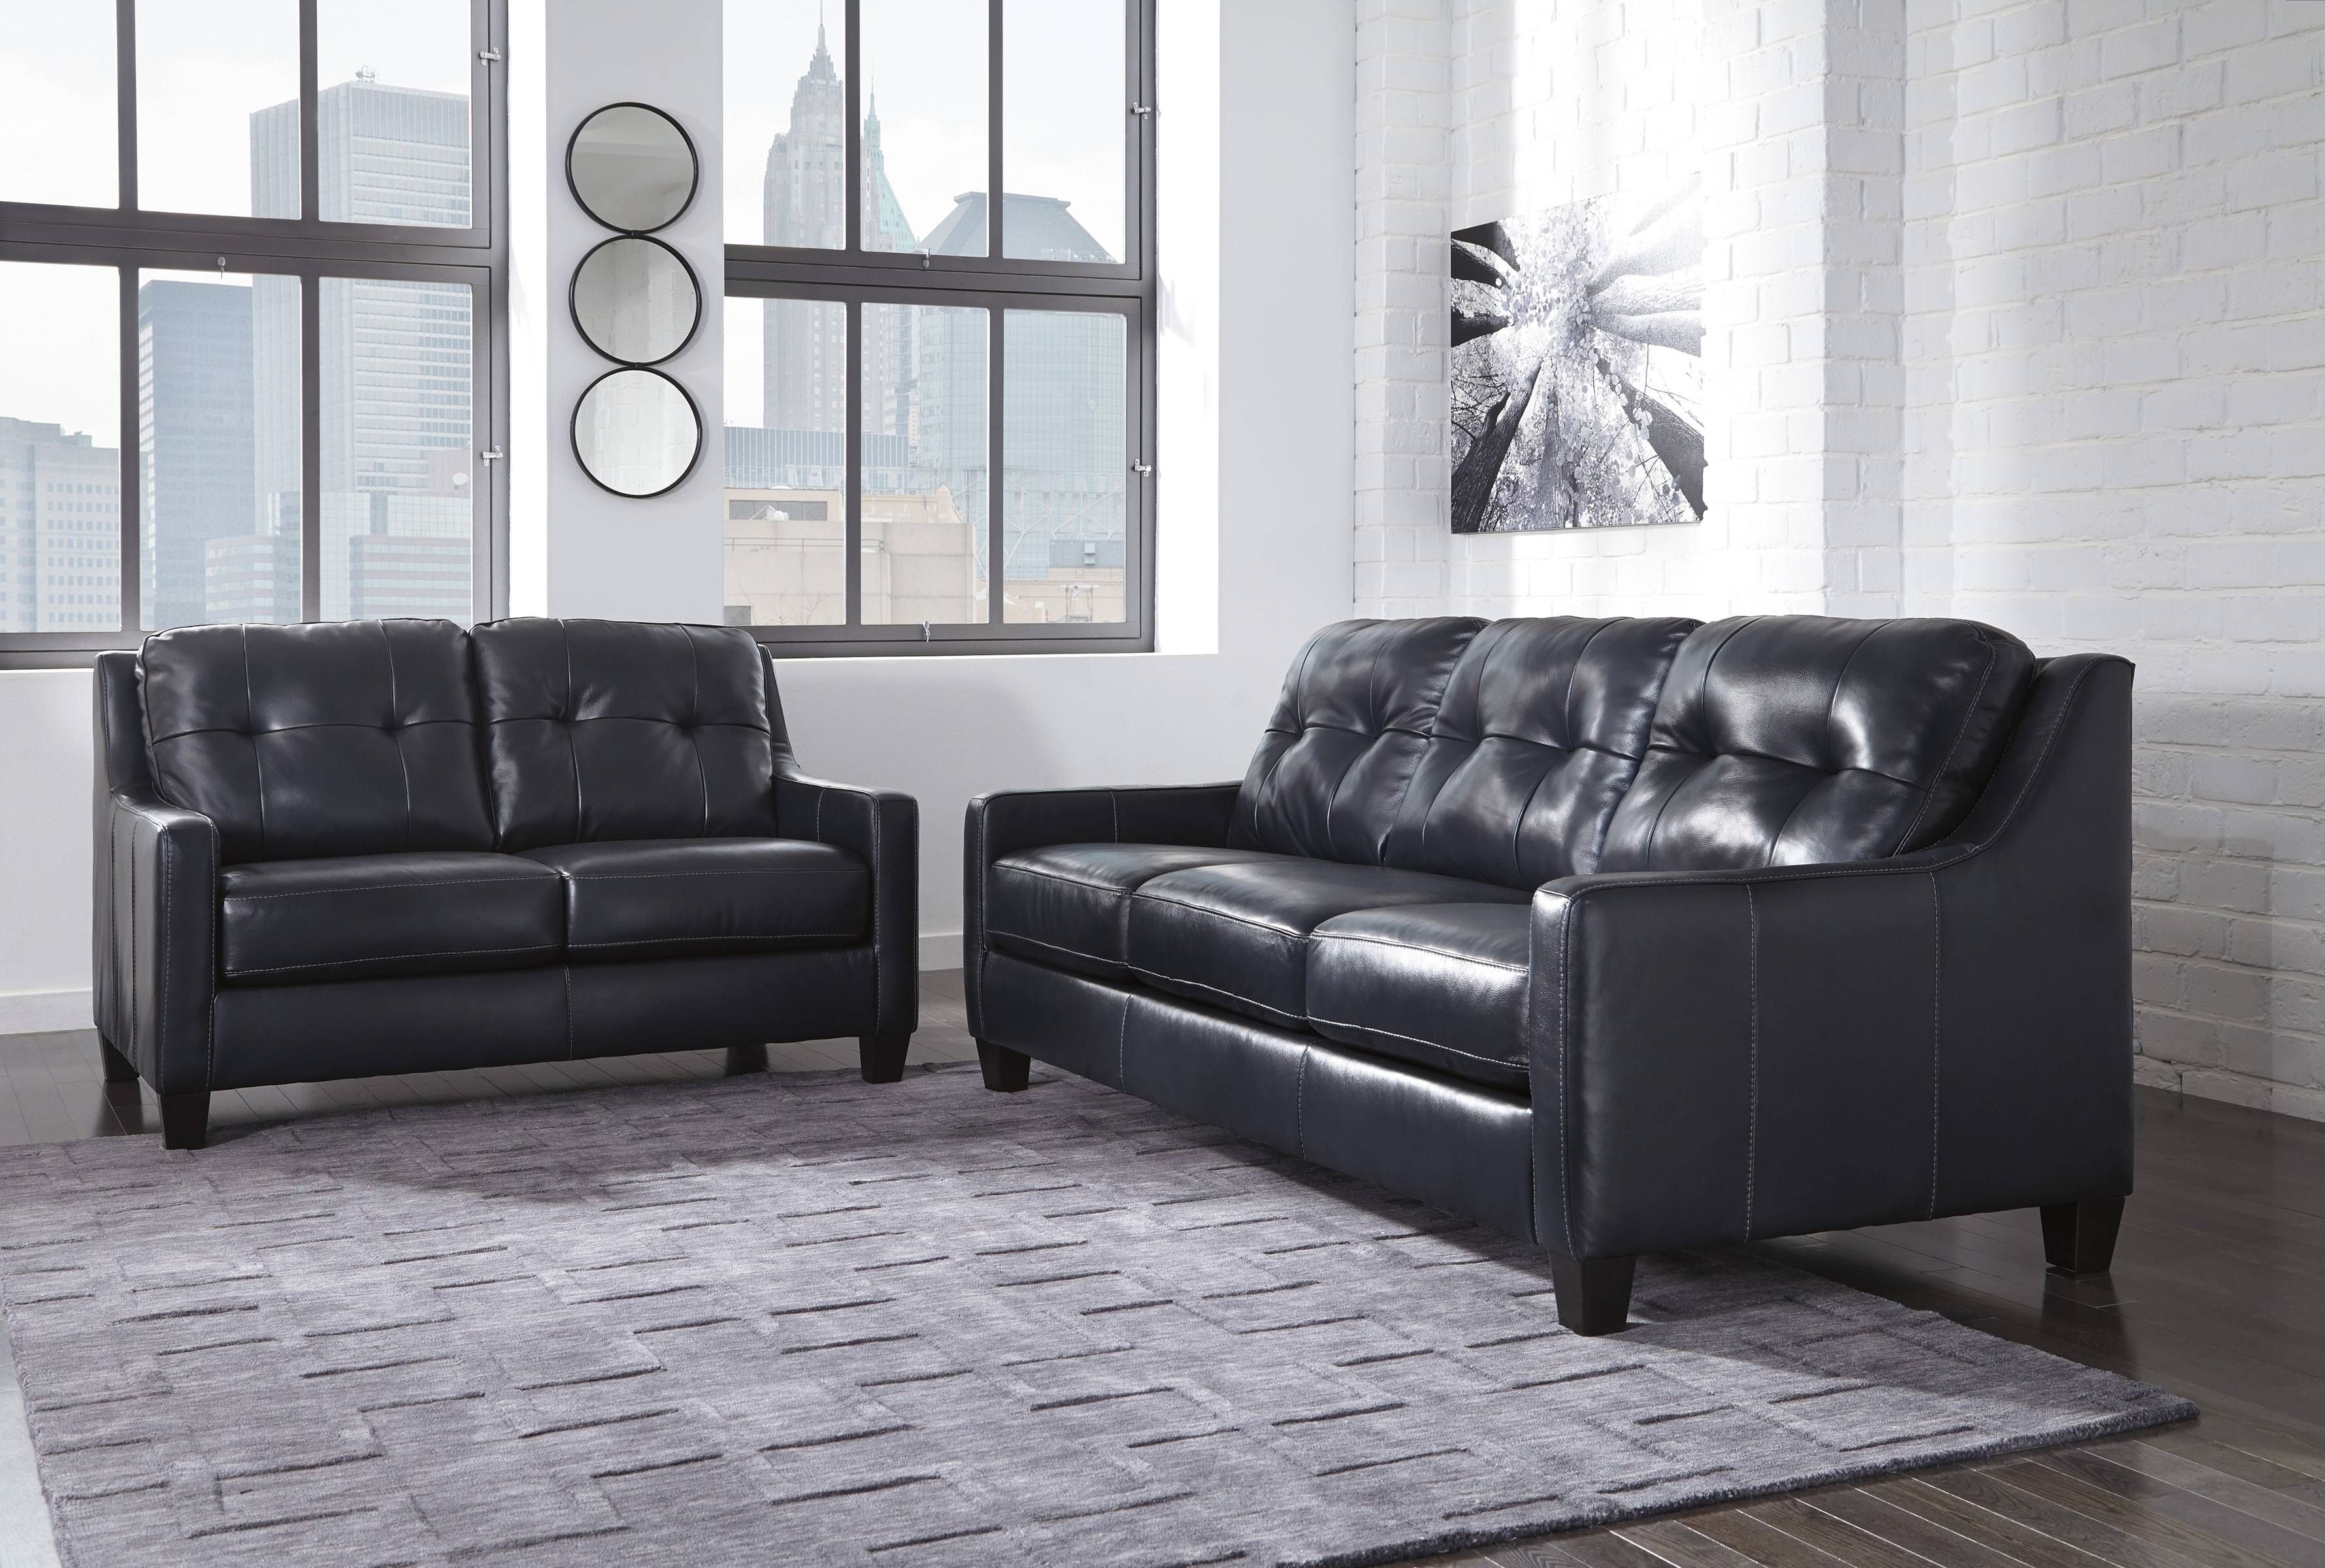 Sofas Center : Max Genuine Leather Sofa Brown The Brick Affordable Throughout The Brick Leather Sofa (View 22 of 30)